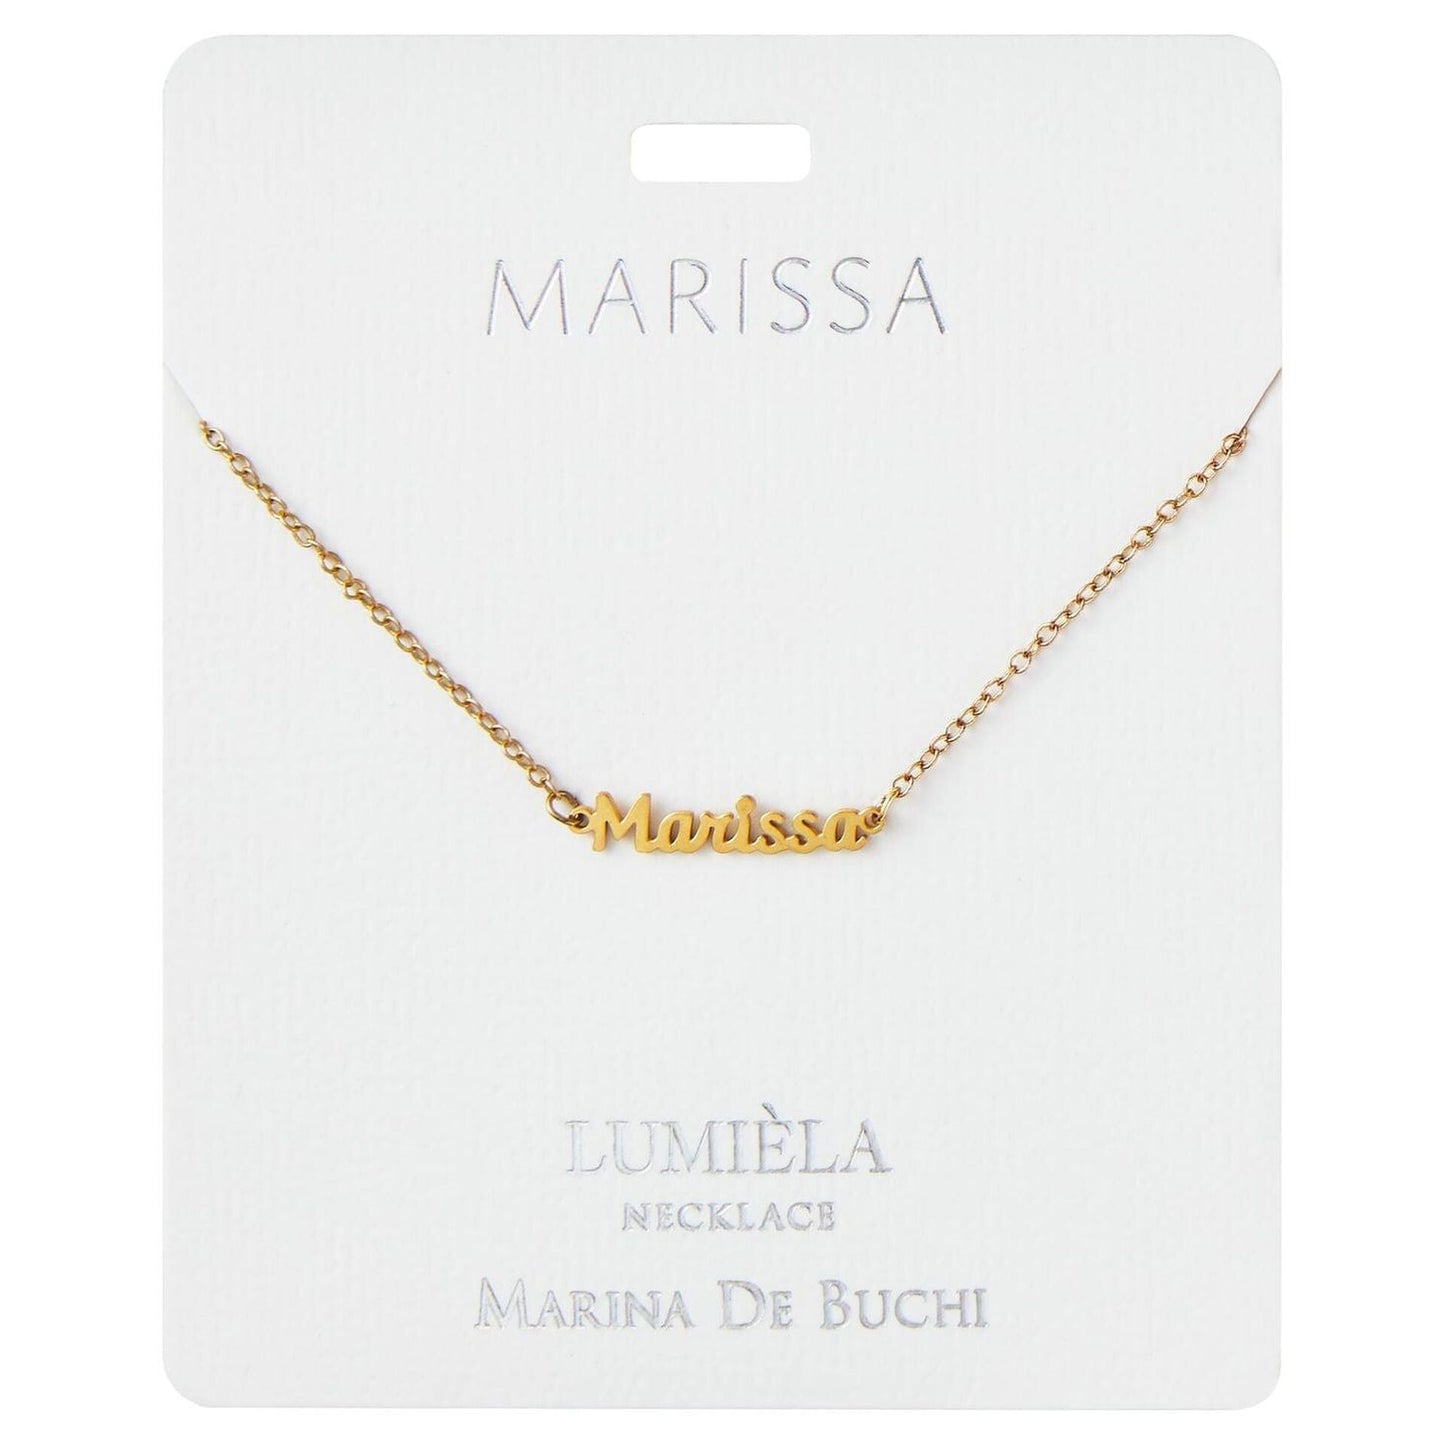 Lumiela Personalized Nameplate Nikki Necklace in Gold Tone